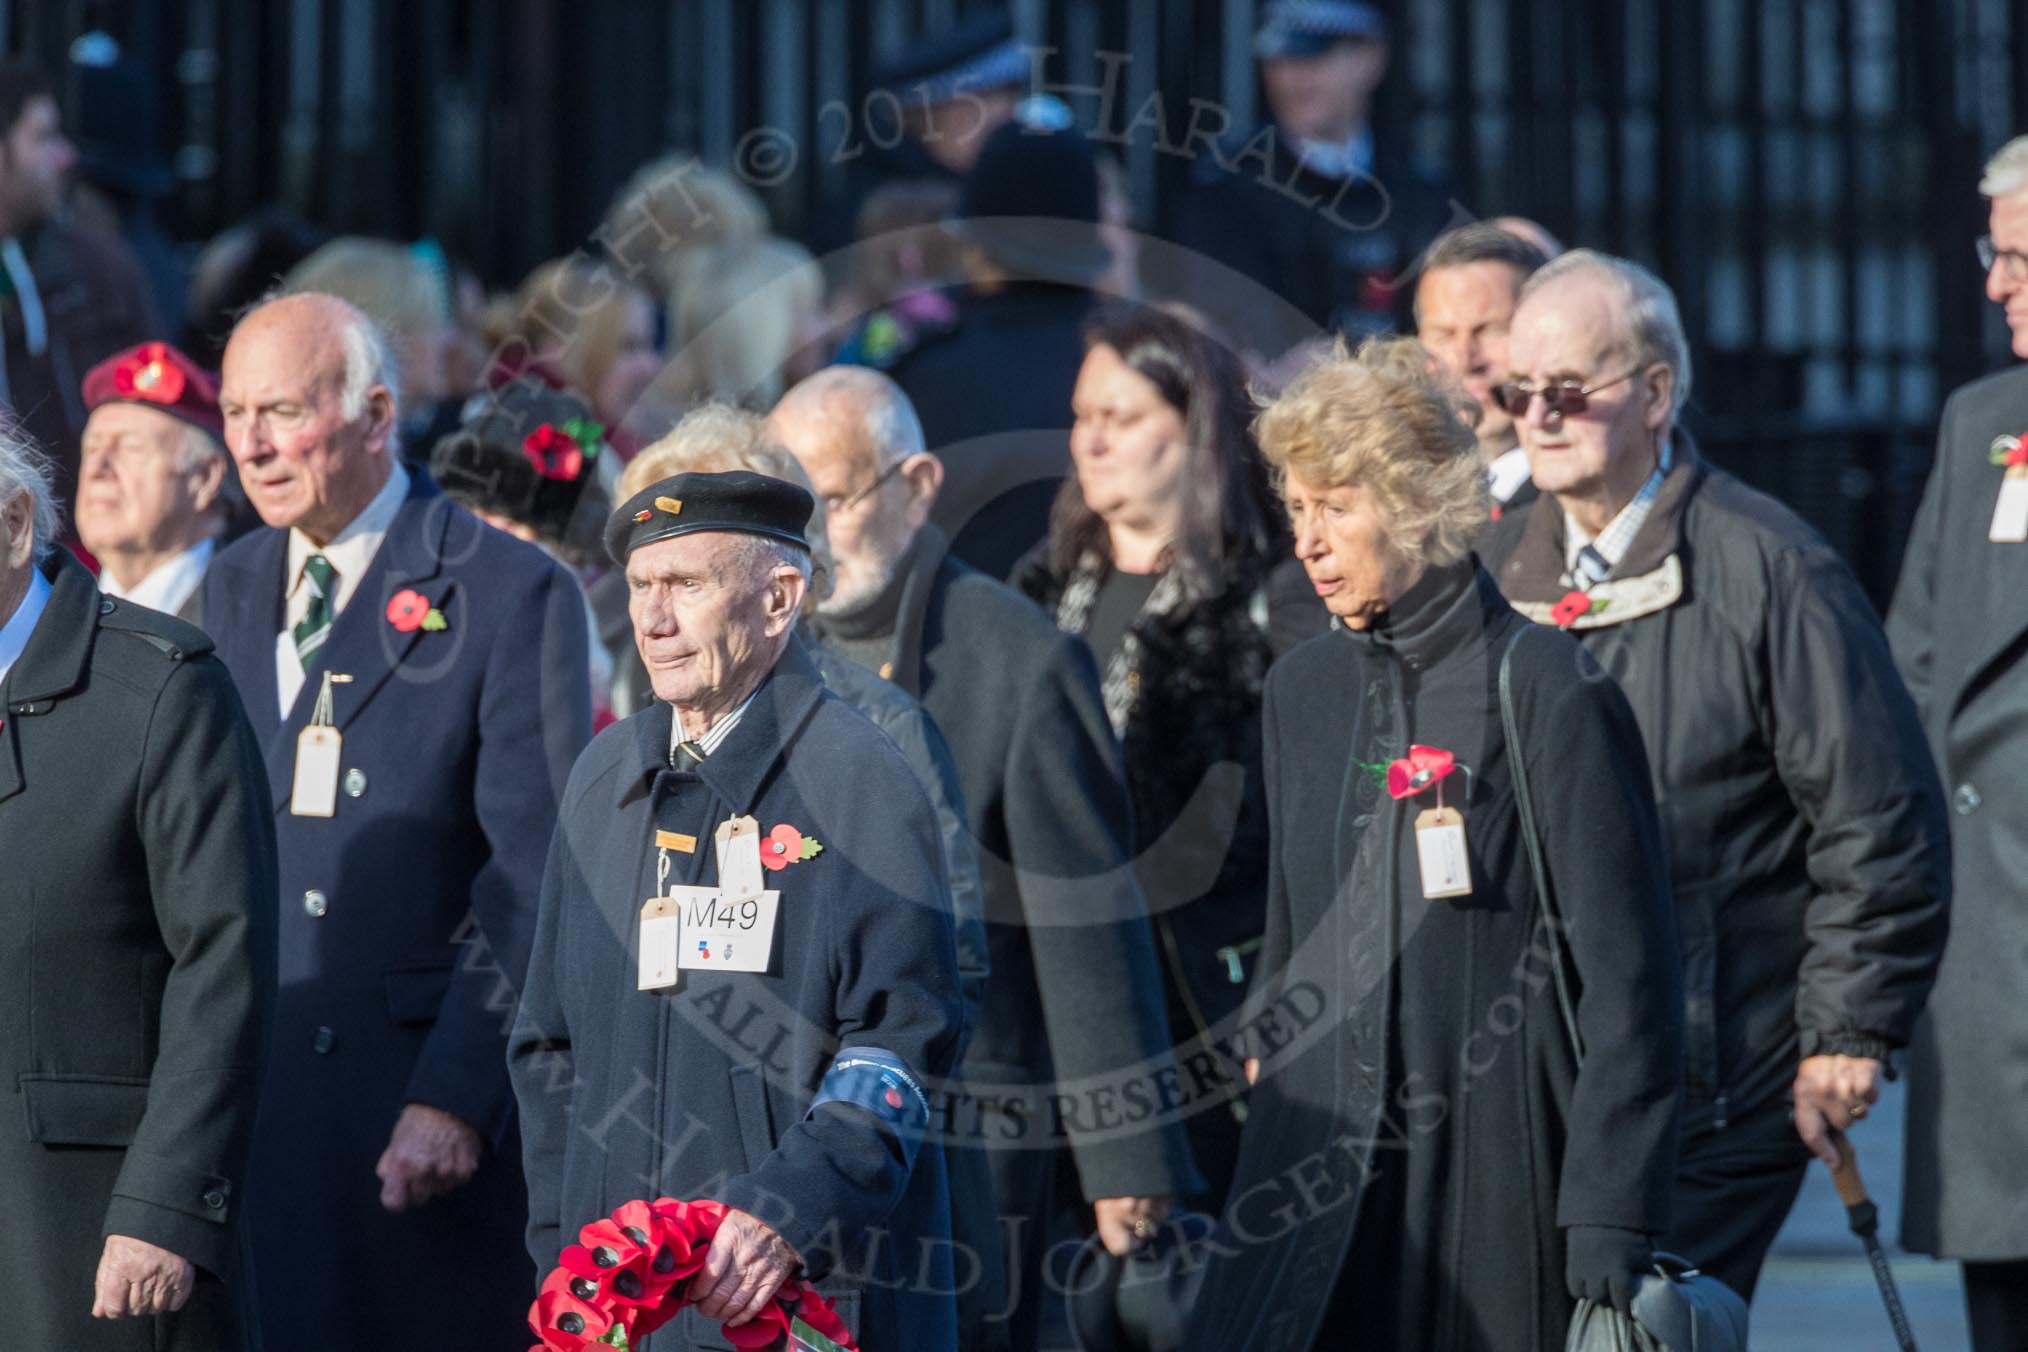 March Past, Remembrance Sunday at the Cenotaph 2016: M49 The British Evacuees Association.
Cenotaph, Whitehall, London SW1,
London,
Greater London,
United Kingdom,
on 13 November 2016 at 13:20, image #3020